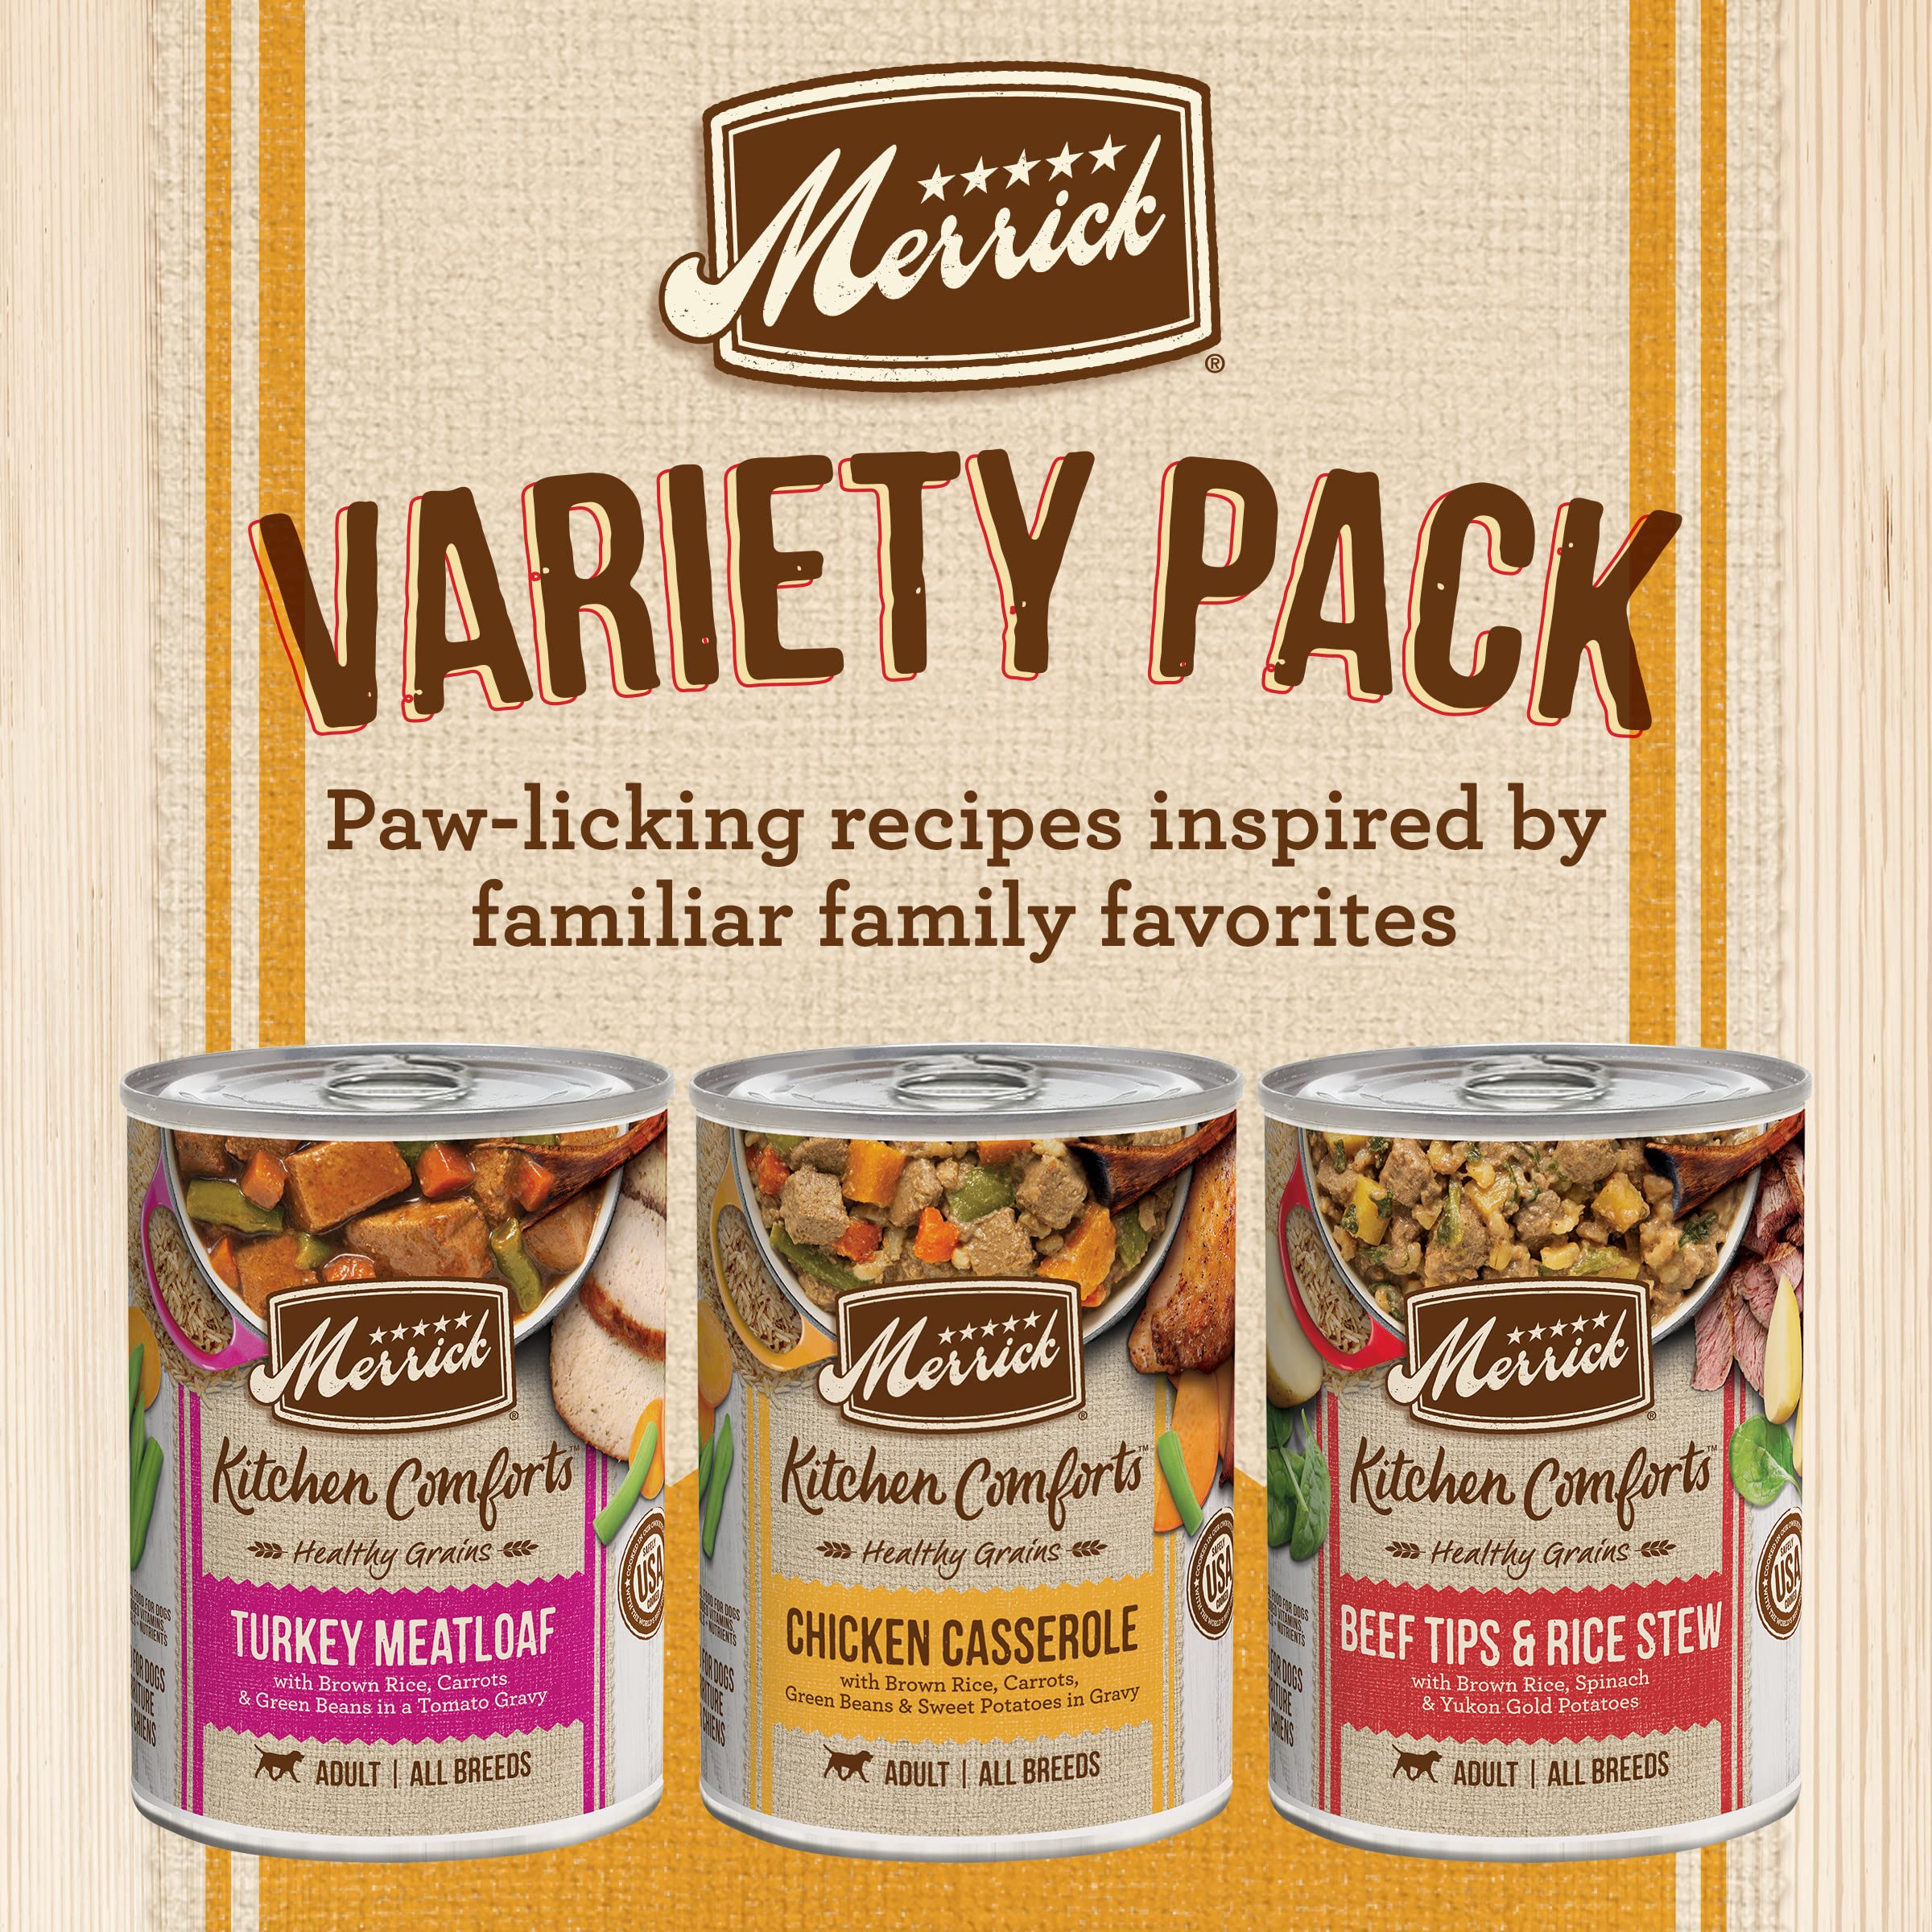 Merrick Healthy Grains Kitchen Comforts Canned Dog Food - Variety Pack - 12.7 Oz - 12 Count  